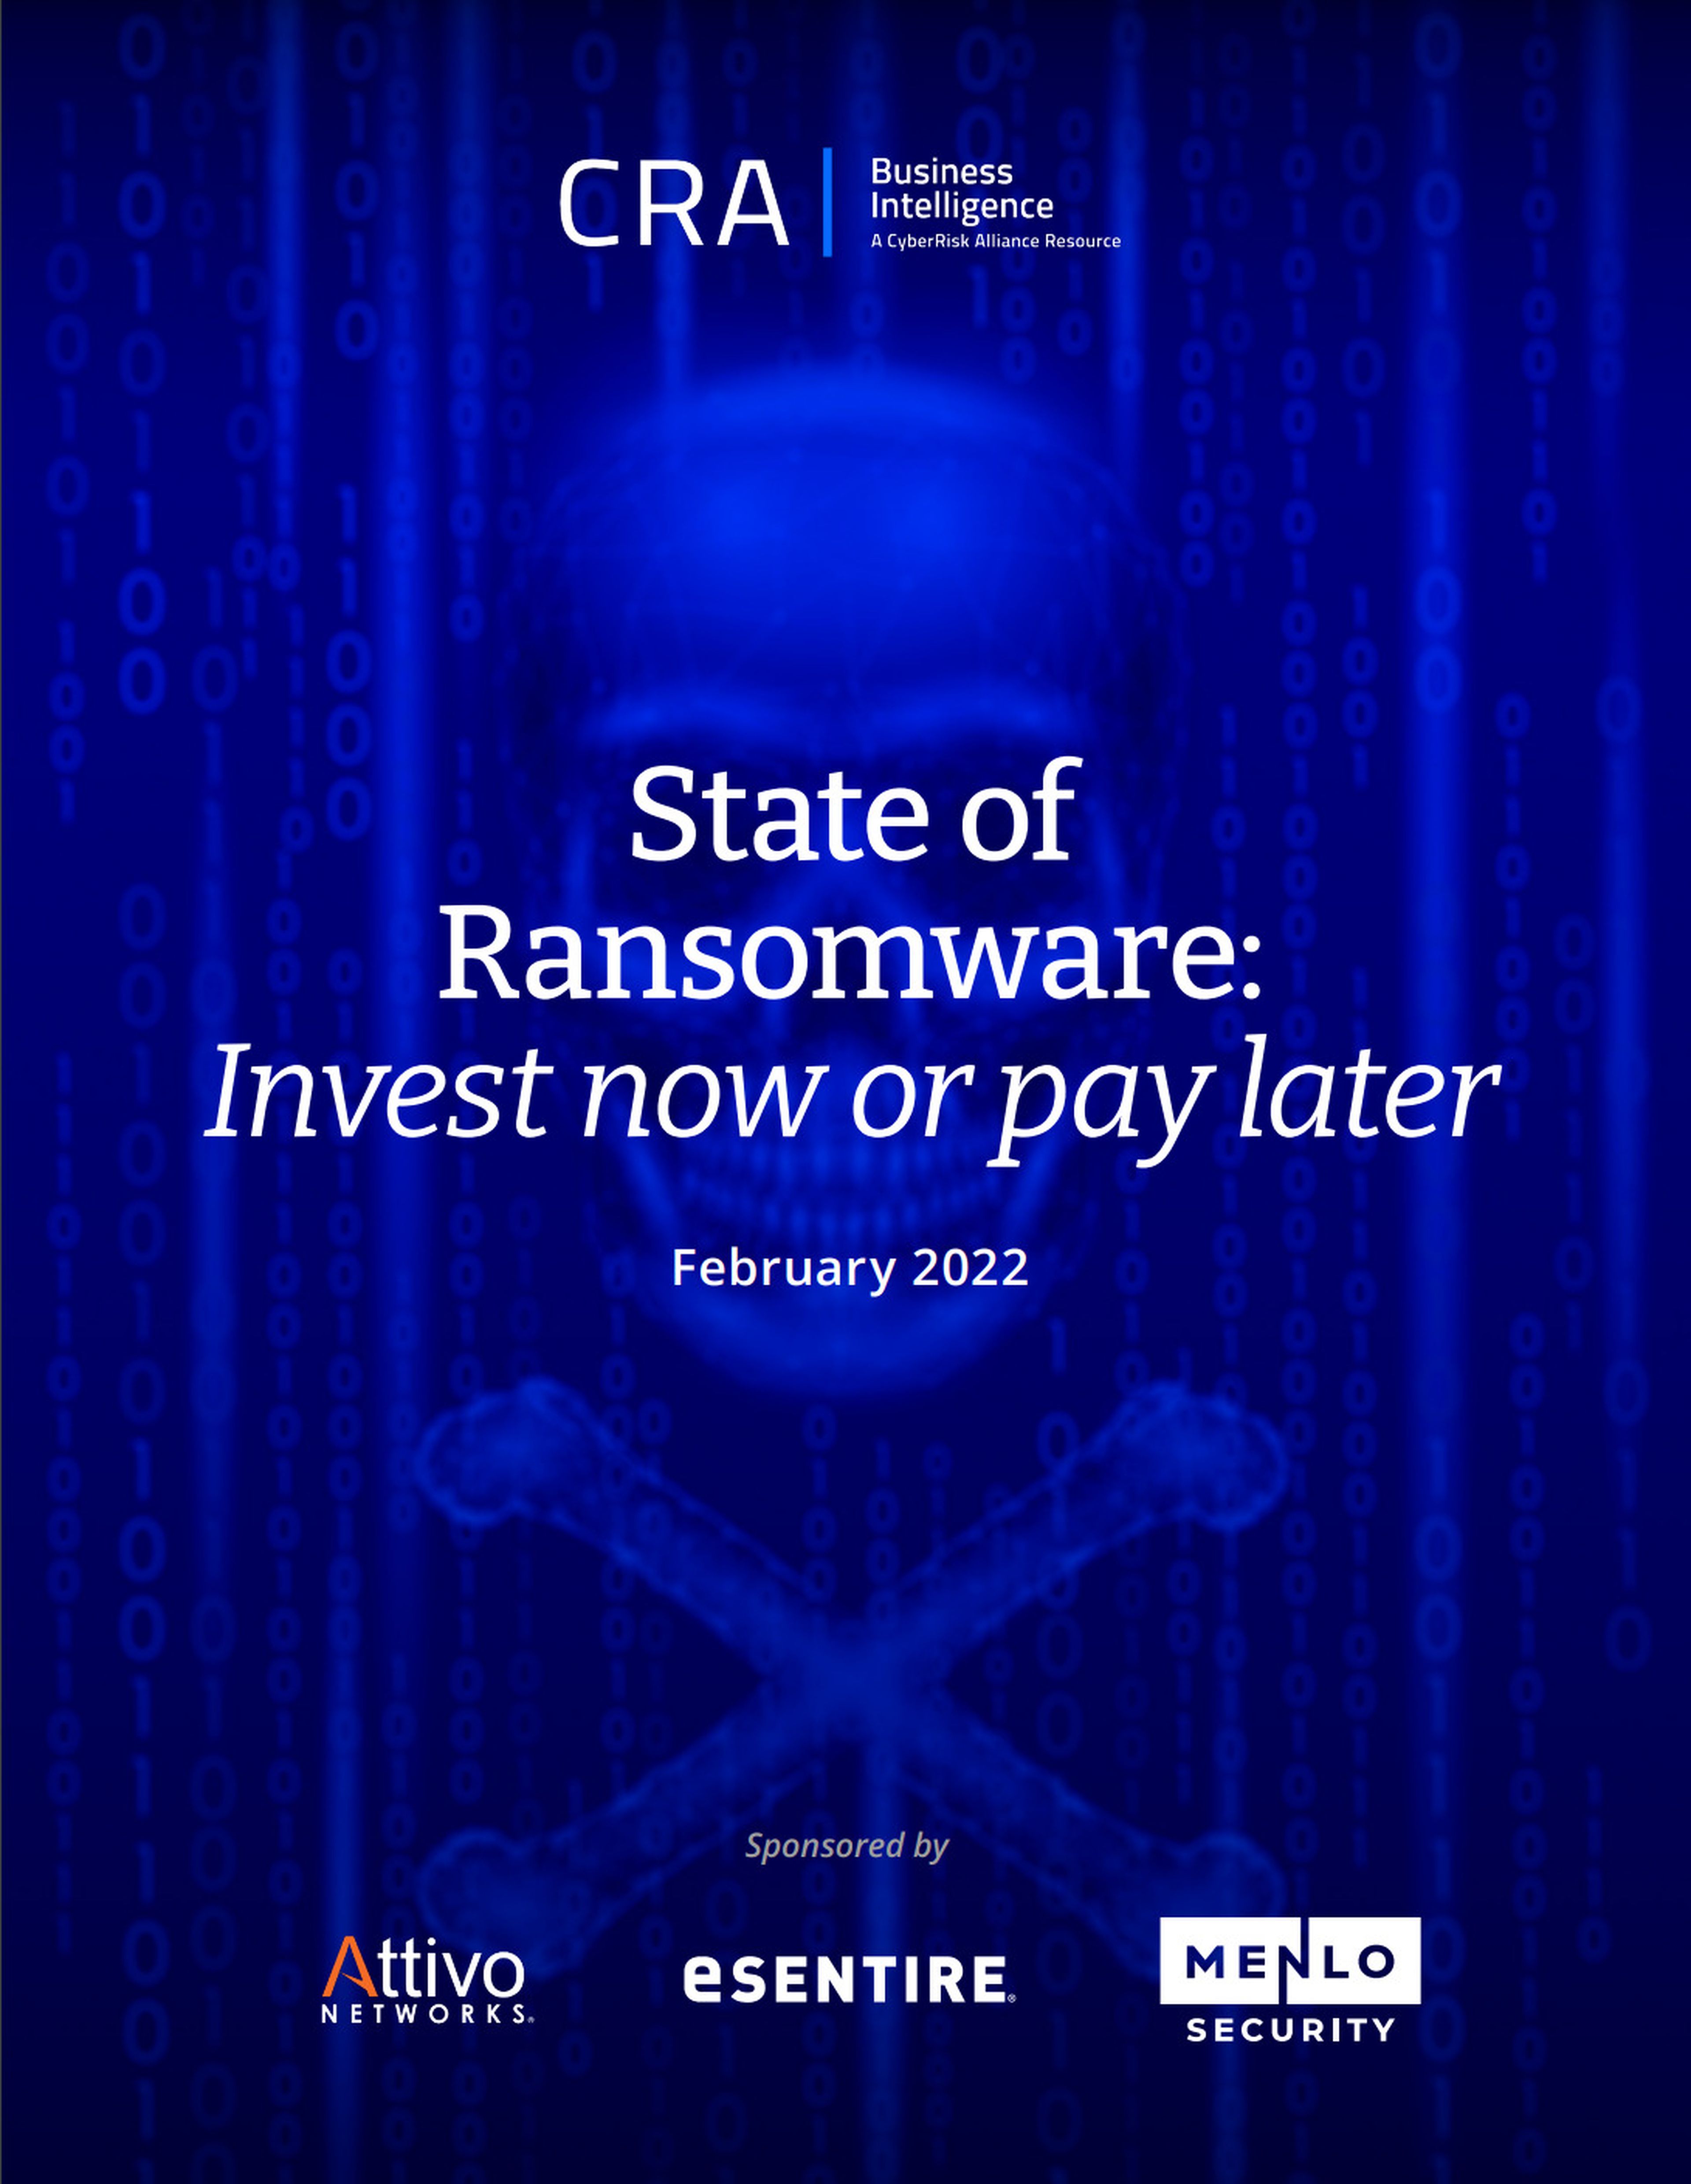 CRA State of Ransomware Study: Invest Now or Pay Later